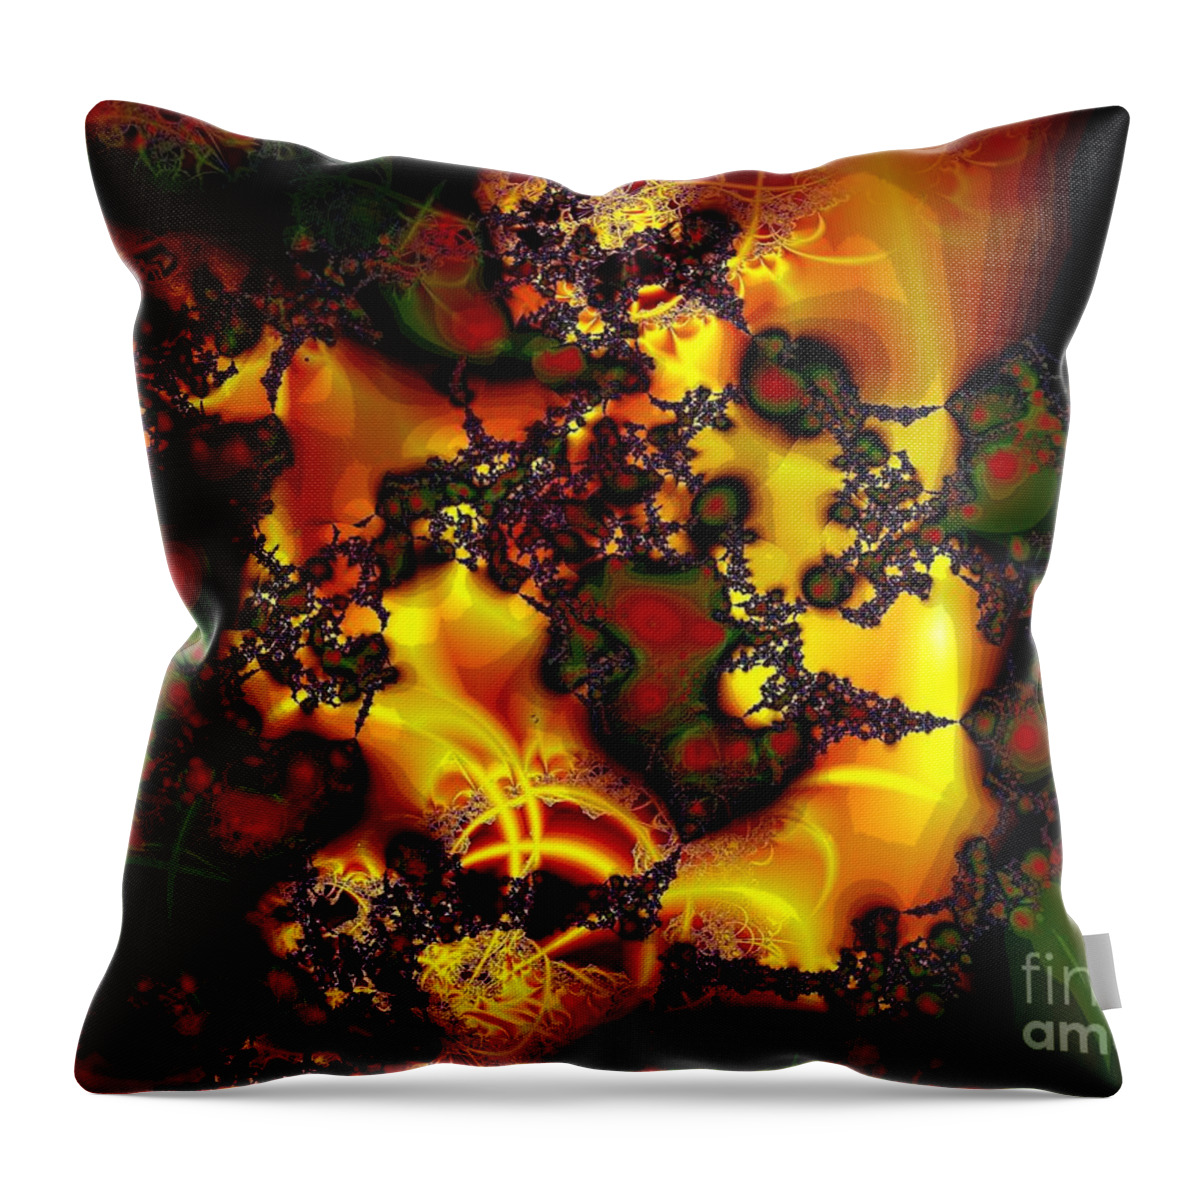 Lace Throw Pillow featuring the digital art Held Together With Lace by Ronald Bissett